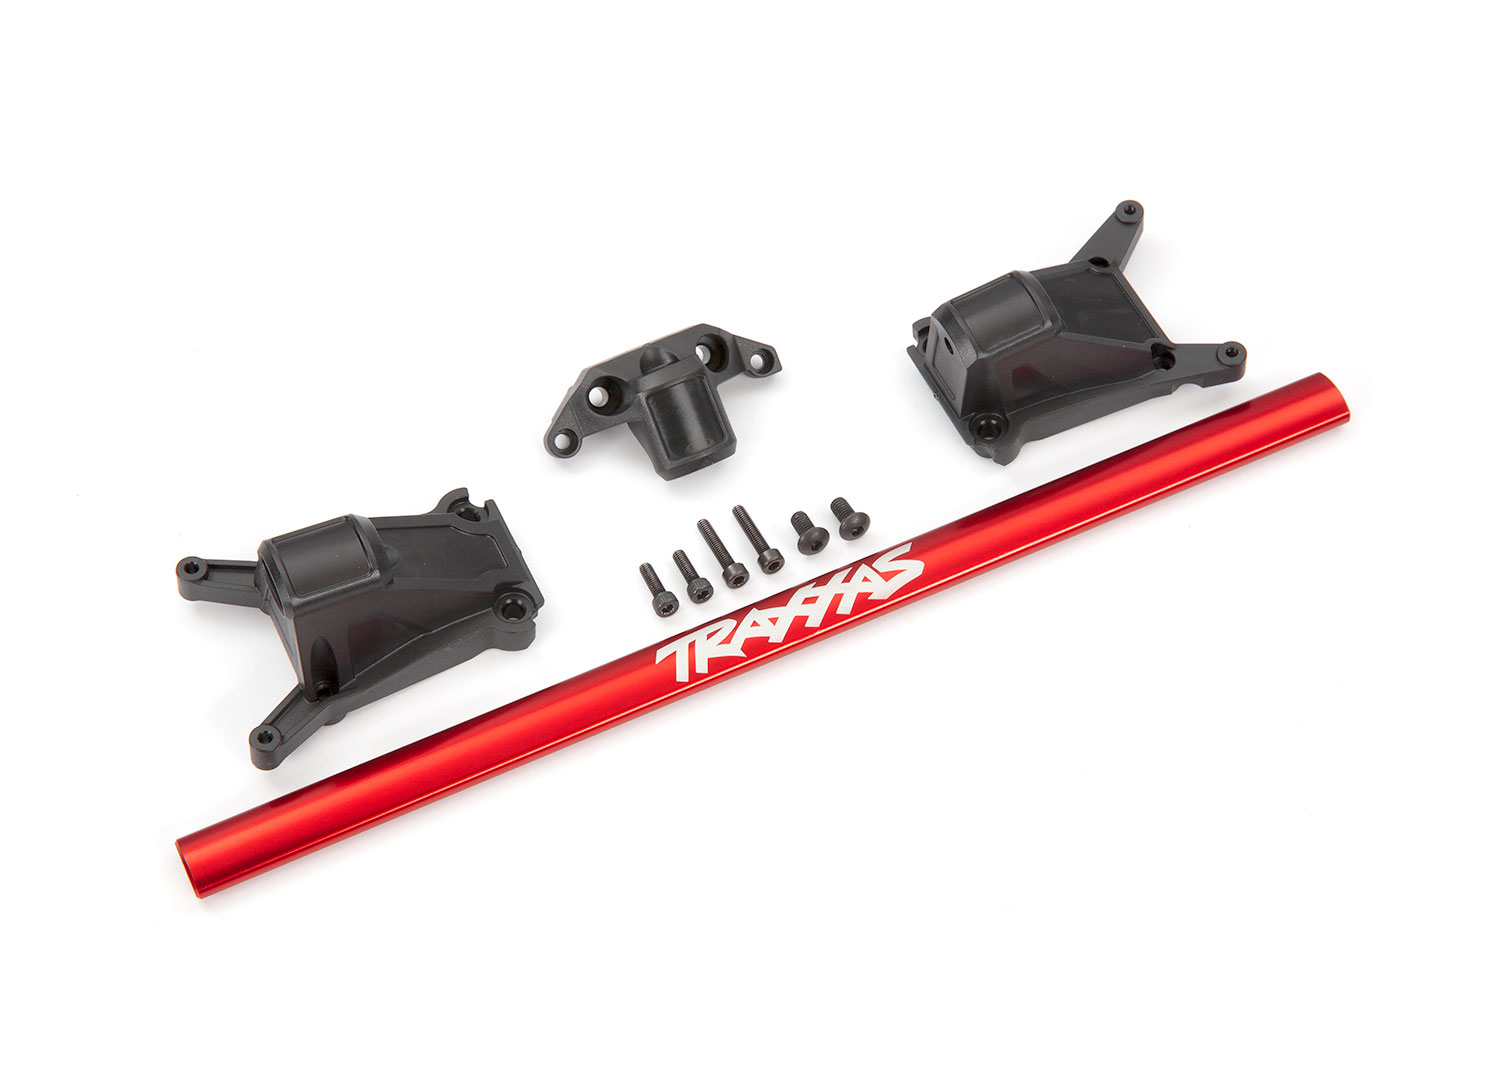 Chassis brace kit, red (fits Rustler 4X4 and Slash 4X4 equipped with Low-CG chassis) (TRX-6730R)